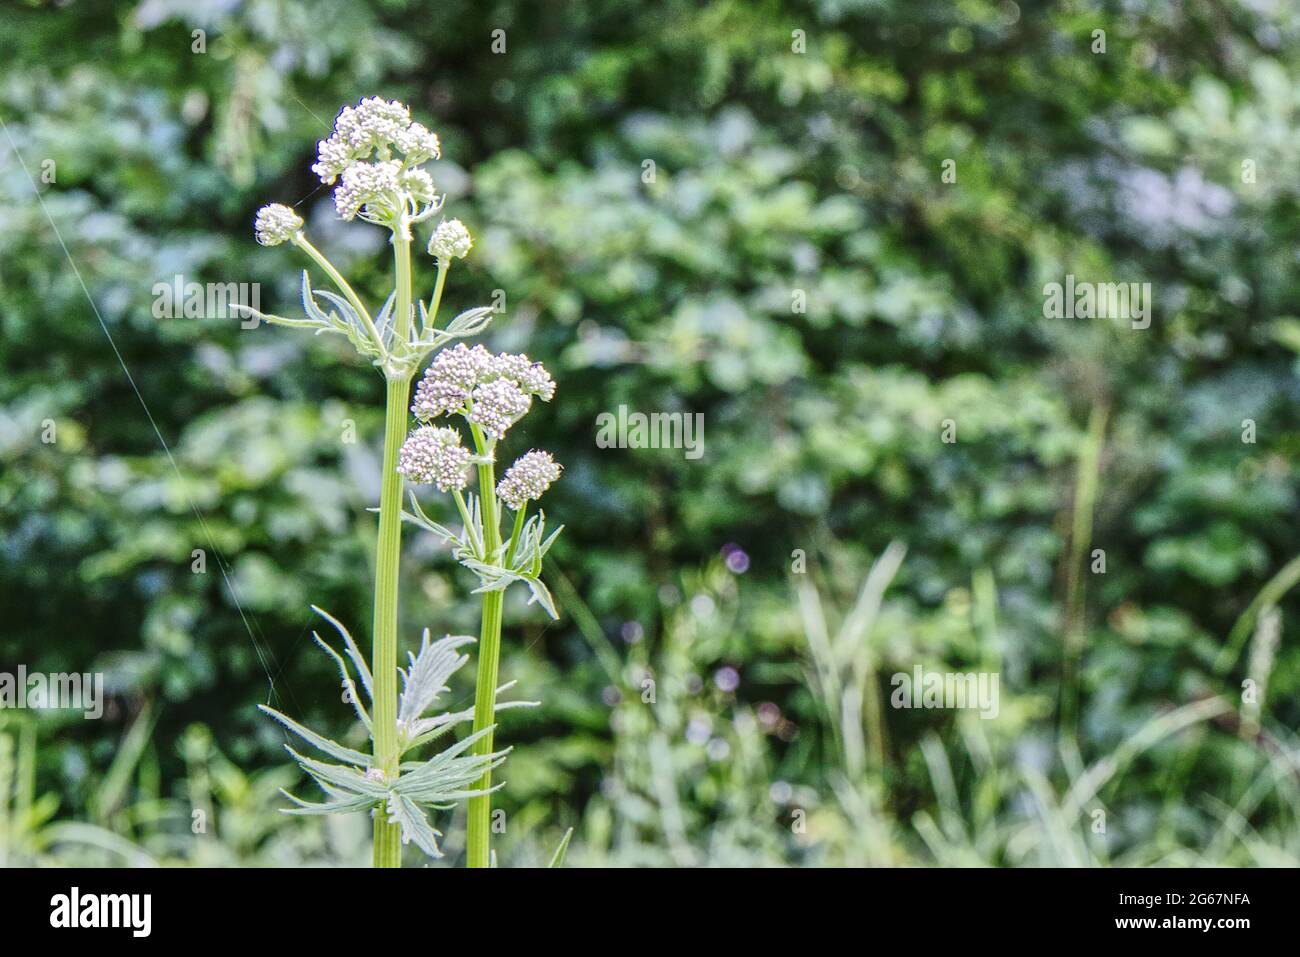 close up of flowering plant Stock Photo